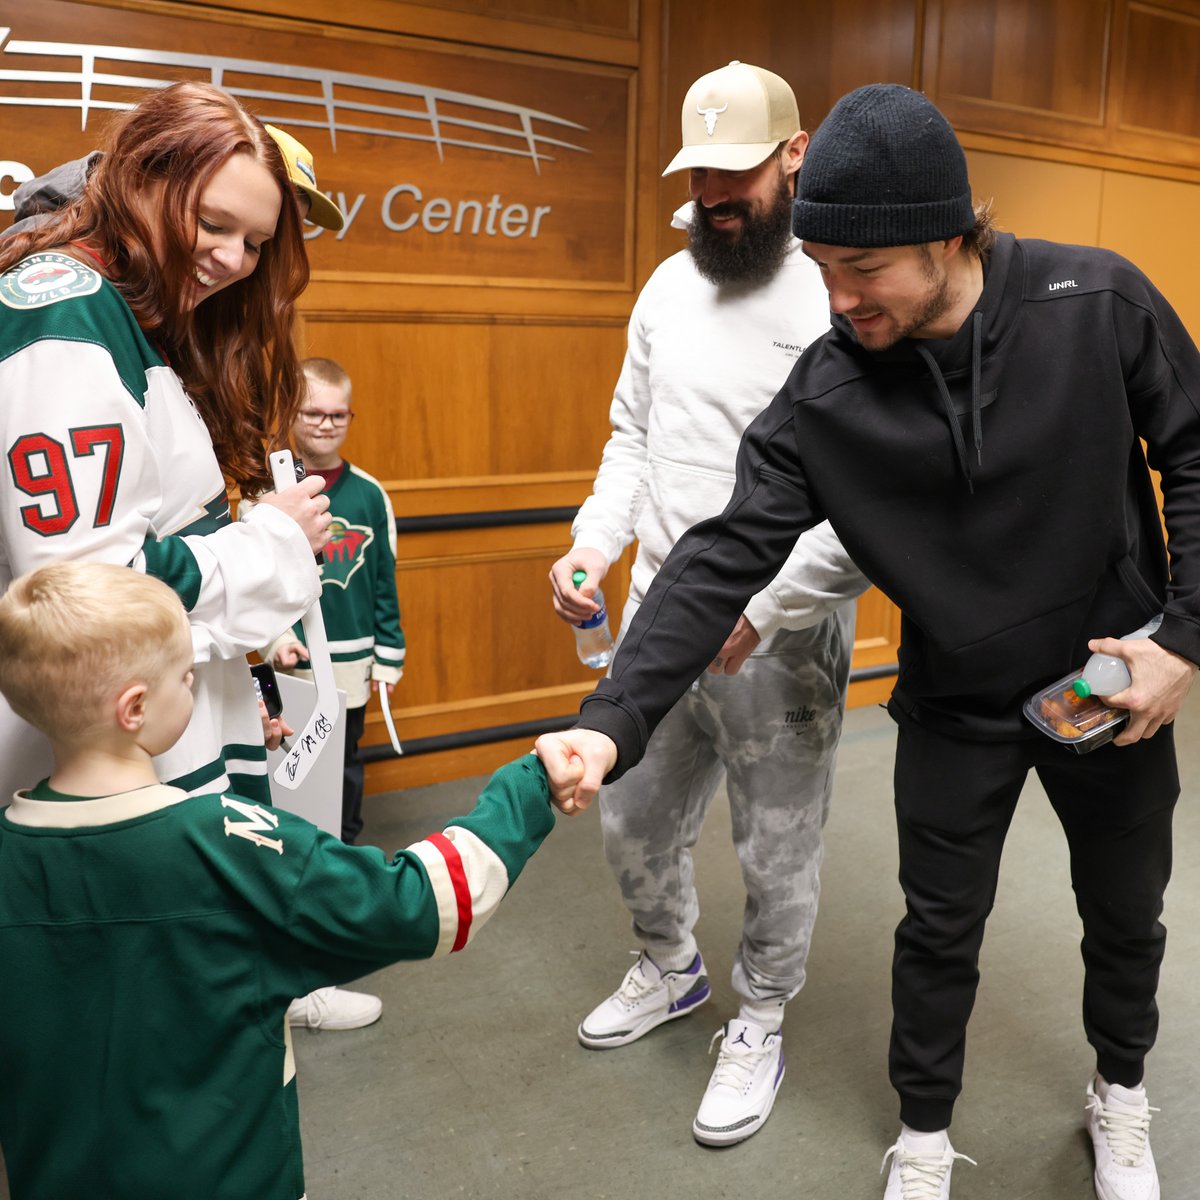 Making new friends 🥹 Thanks for joining us as Wild for a Day, Sayer! 🏒 #mnwild